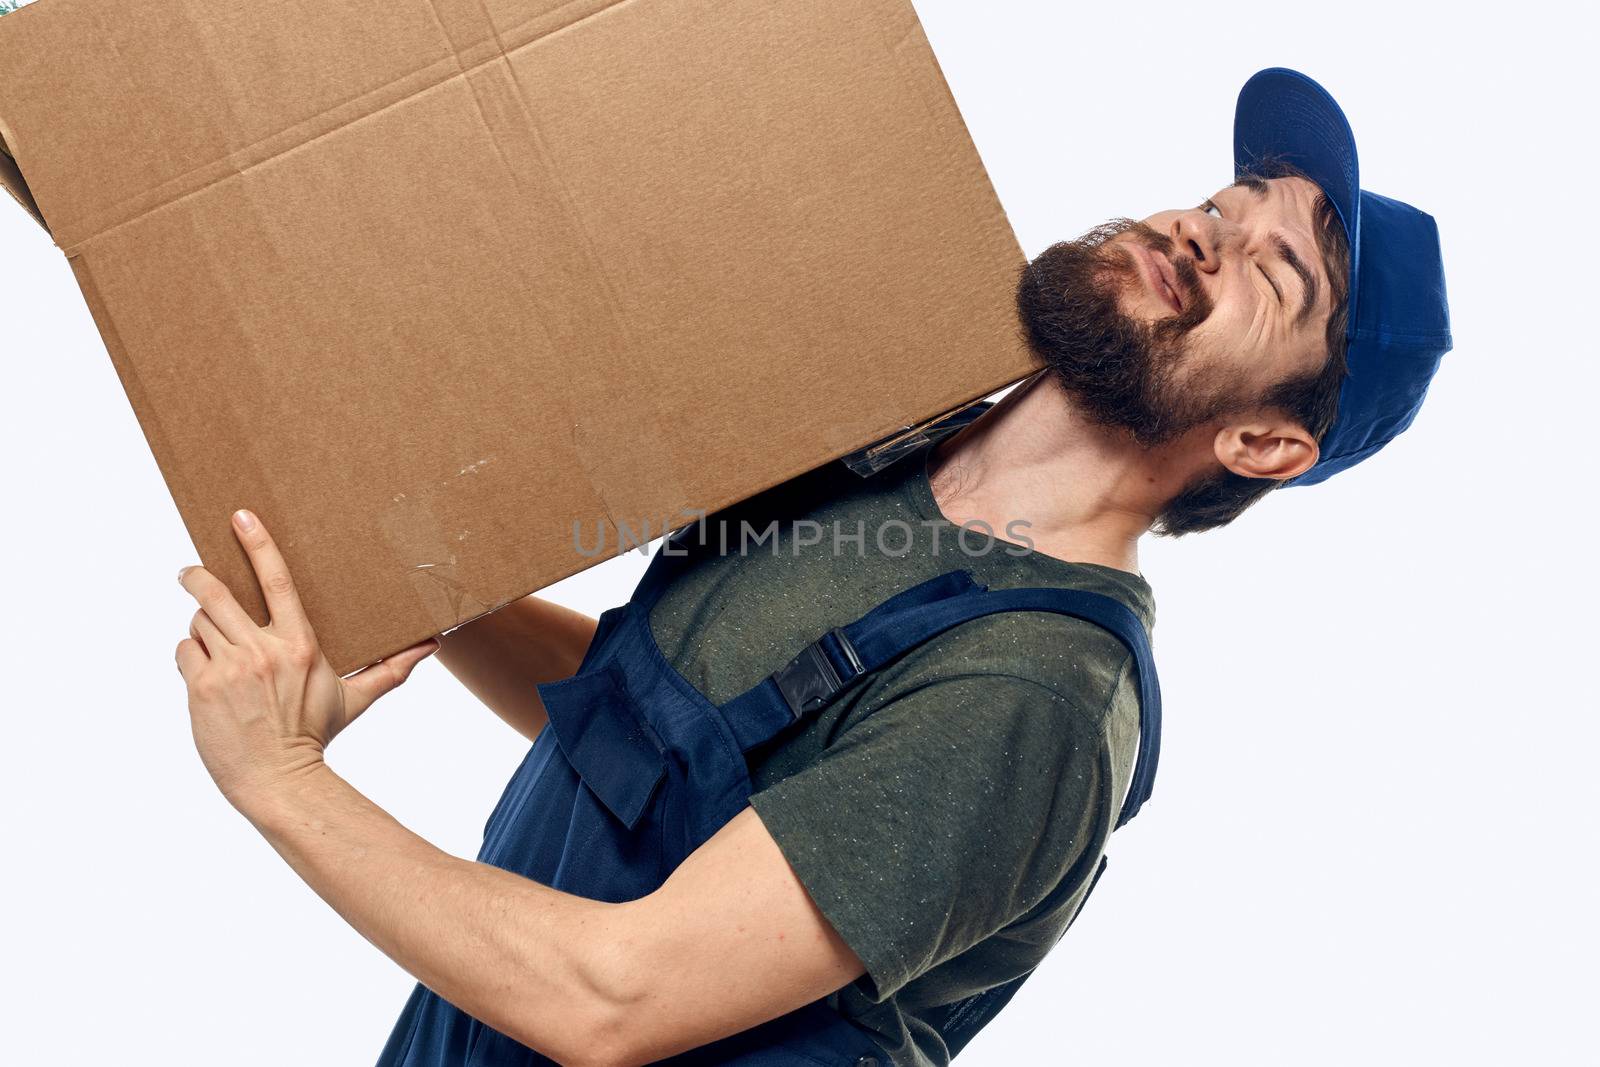 A man in a working uniform with a box in his hands delivery transportation work by SHOTPRIME